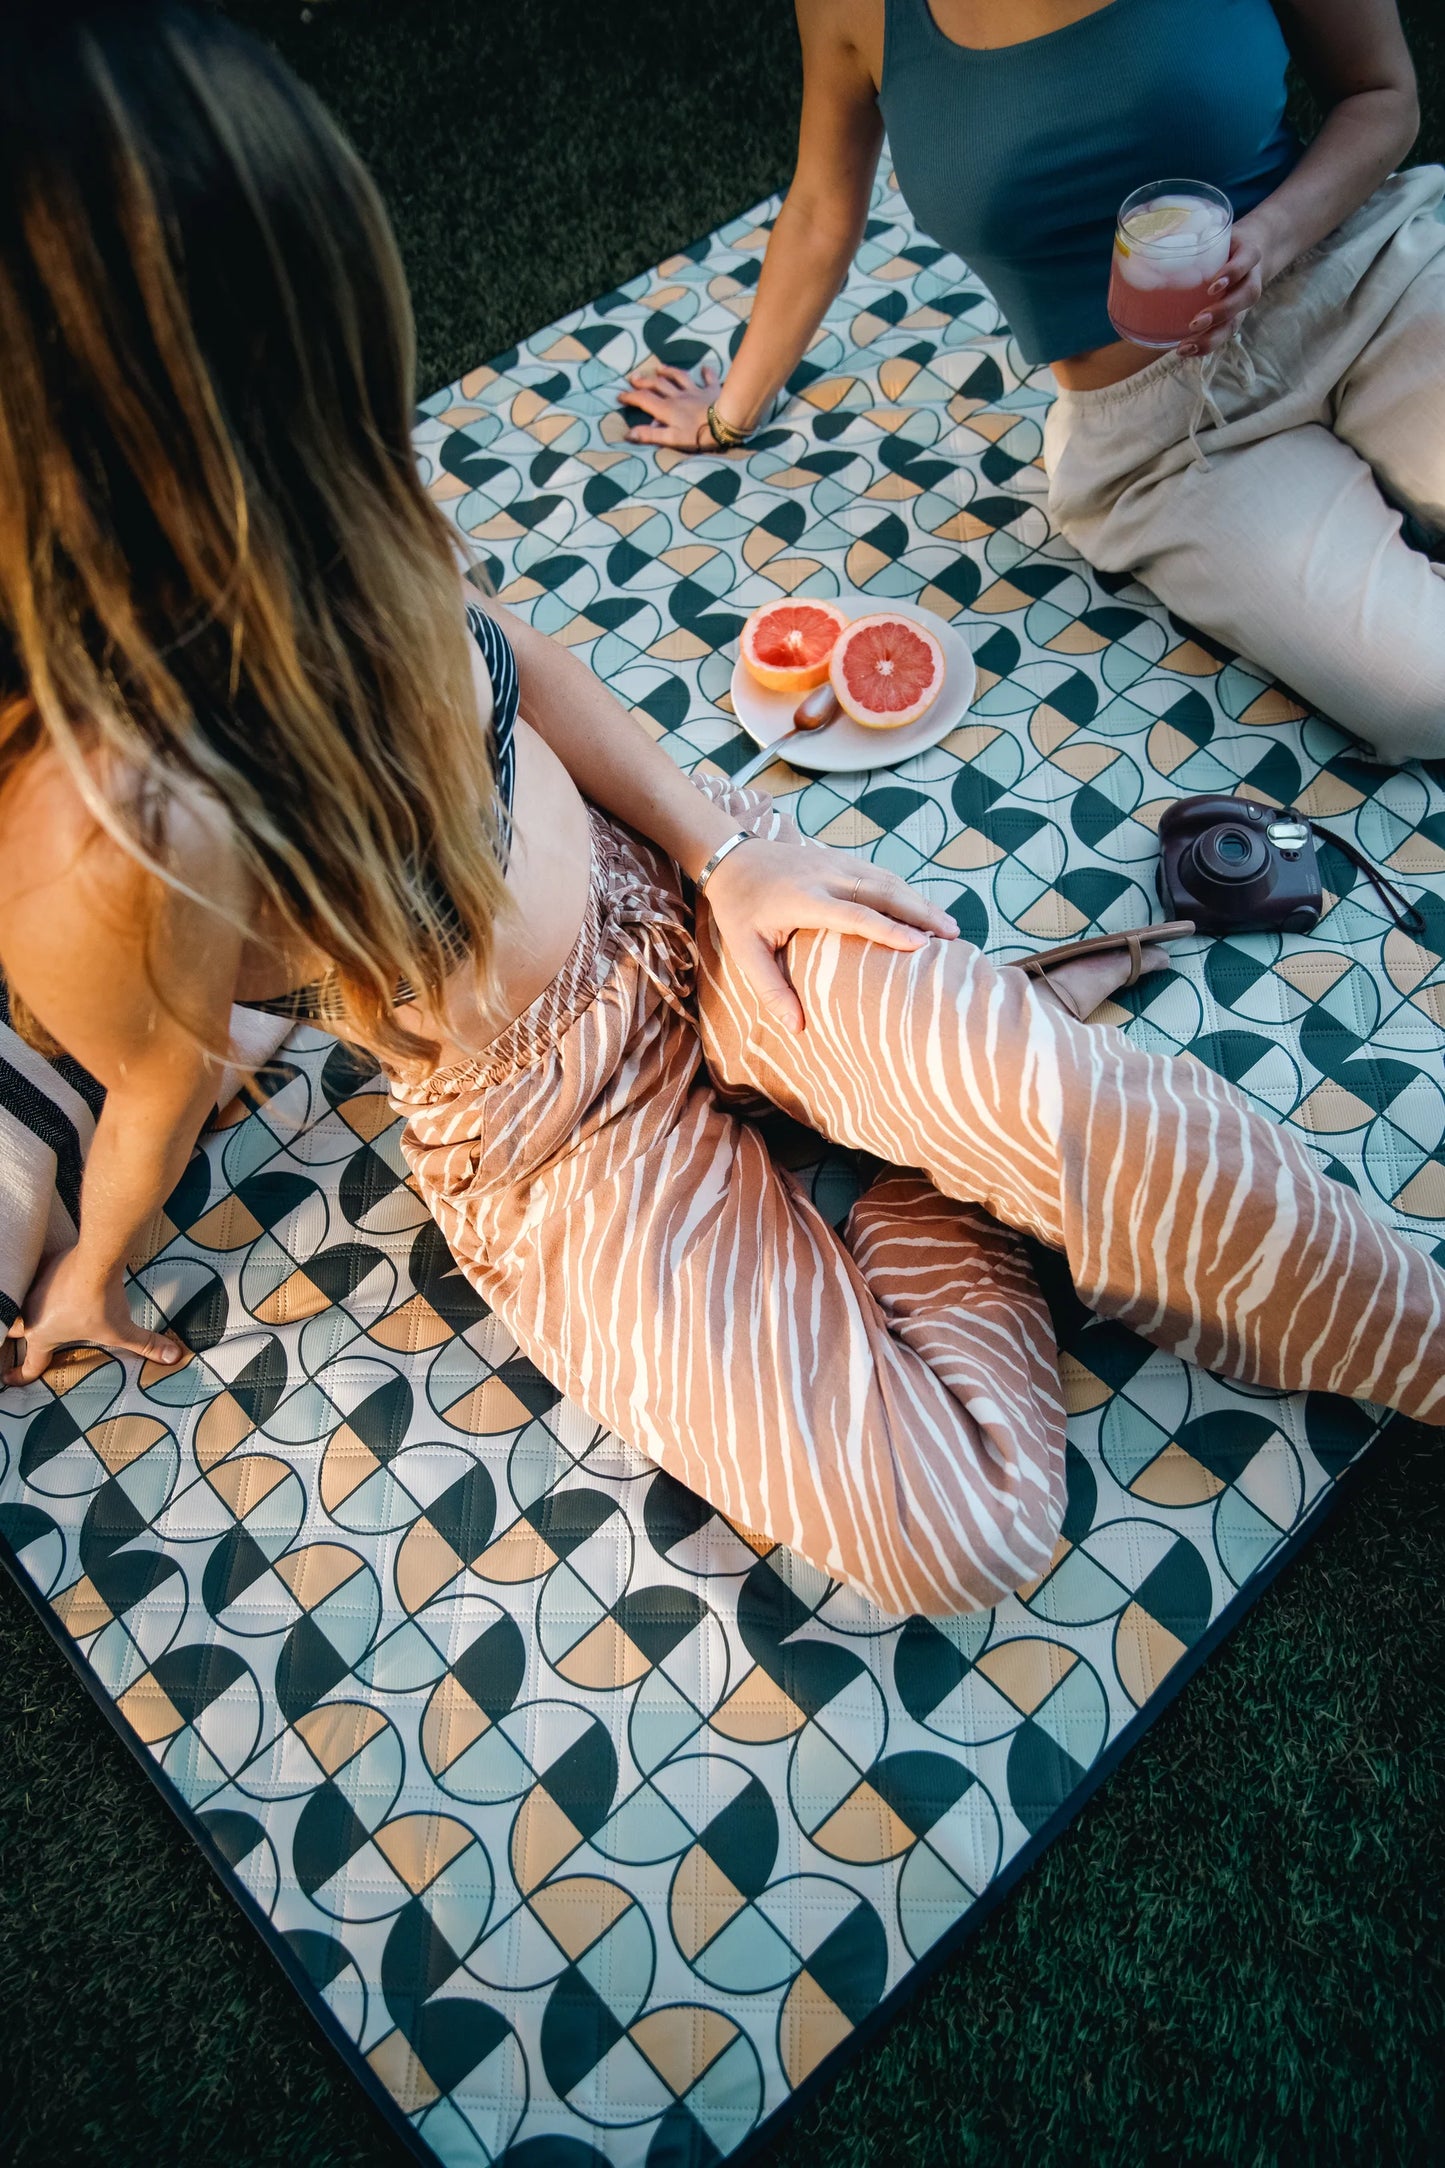 The Excursion Packable Picnic Blanket